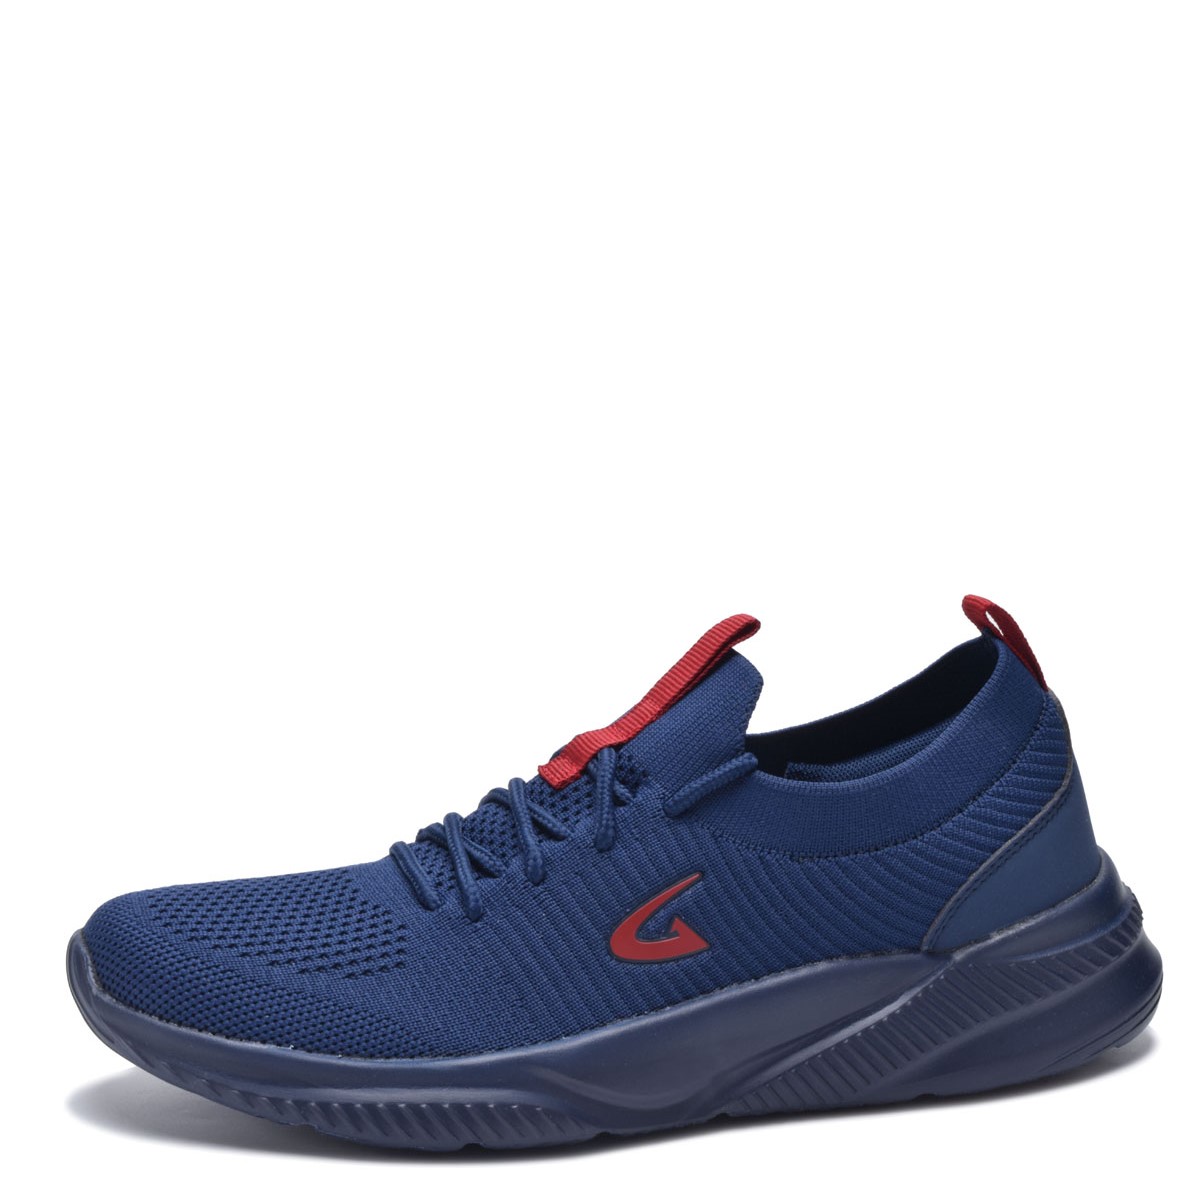 MENS TENNIS TRAINERS